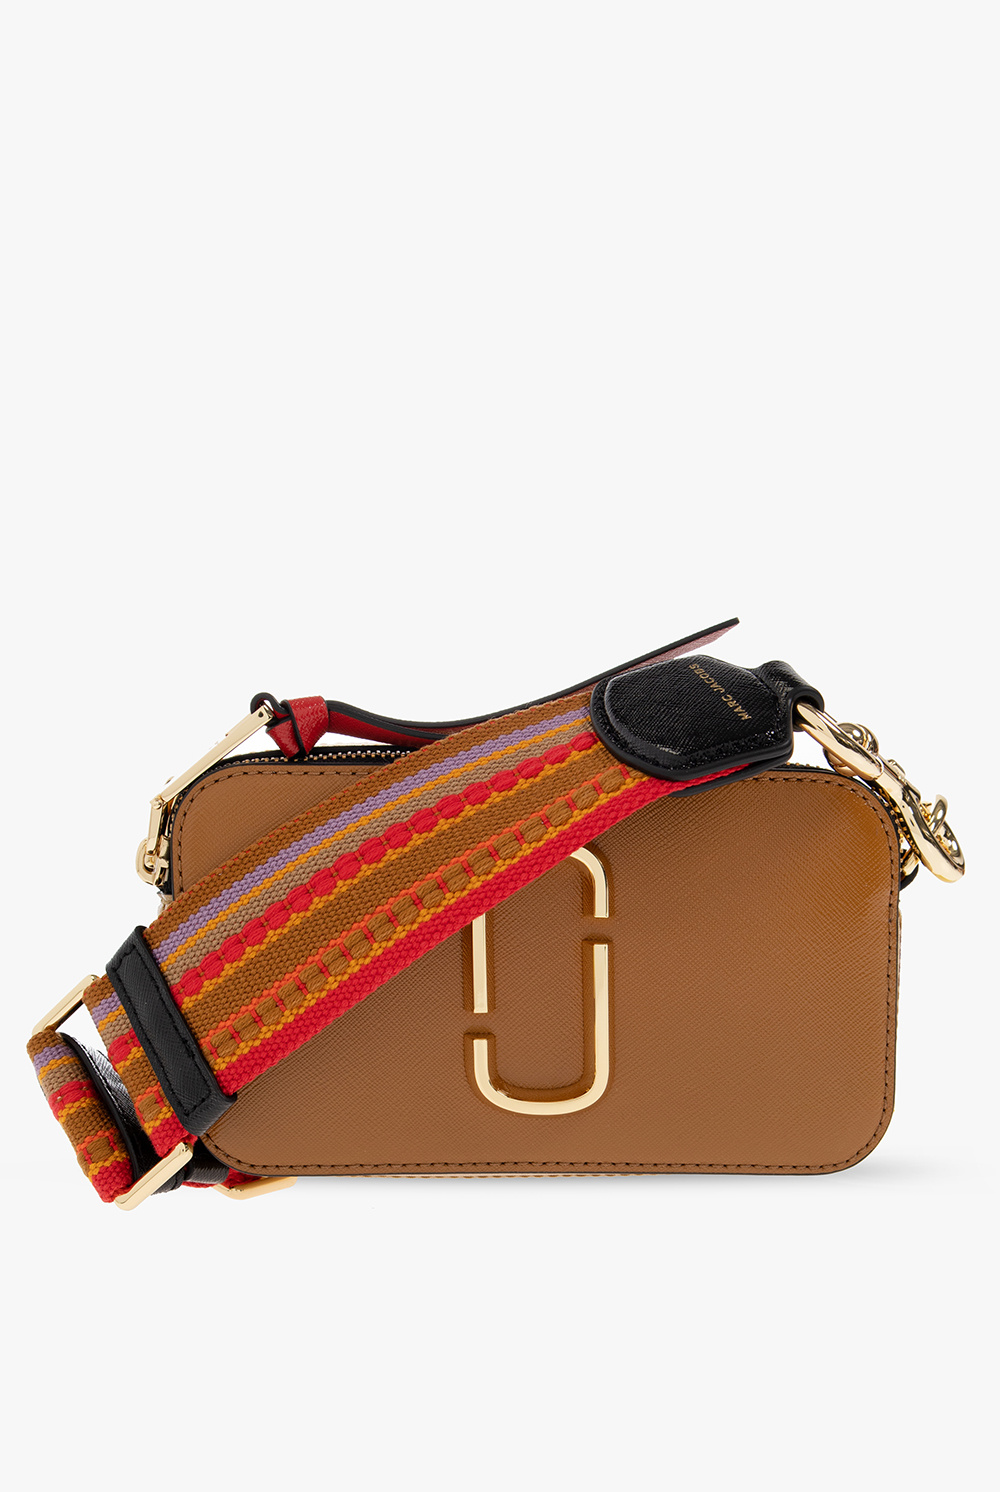 Marc Jacobs Brown/Black Leather & Fabric The Softshot Crossbody